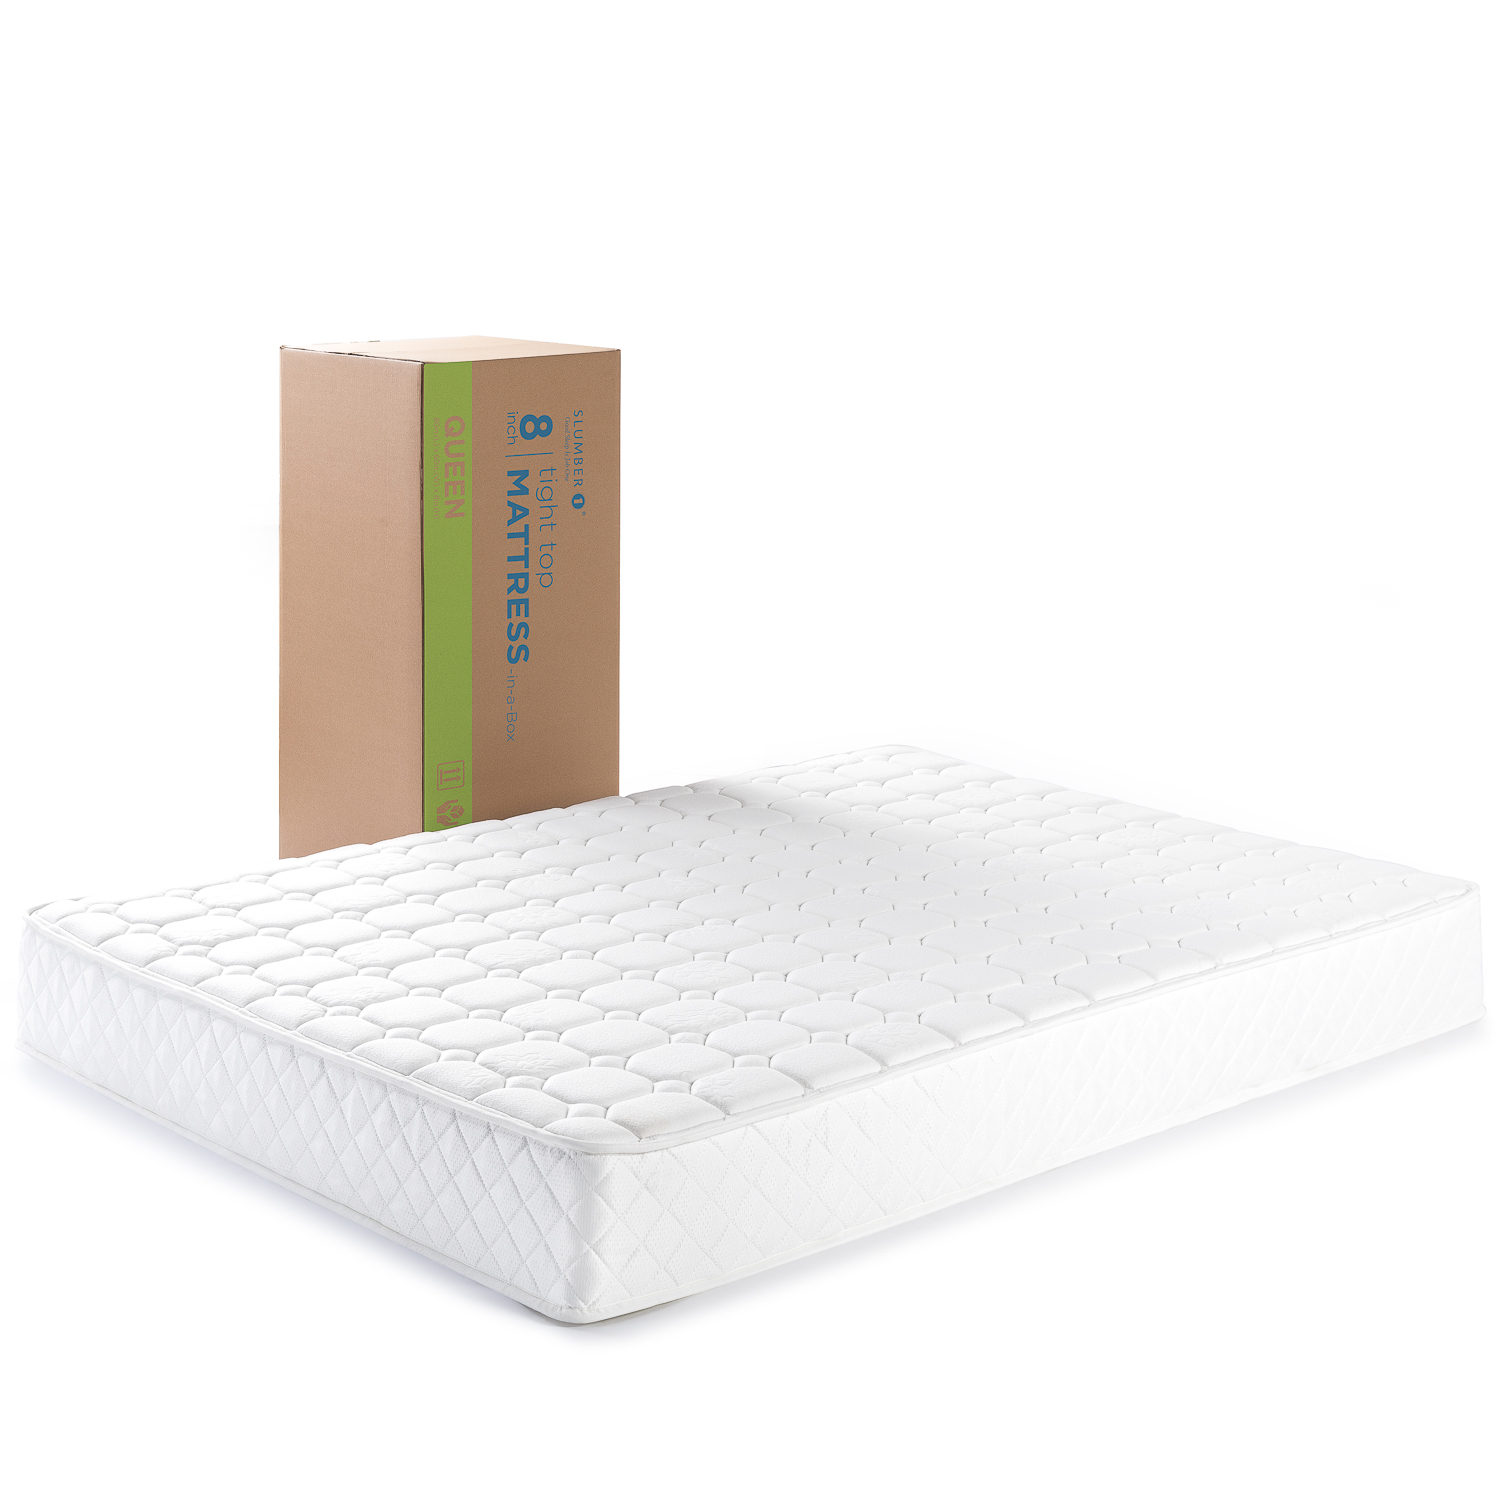 8" Quilted Hybrid of Comfort Foam and Pocket Spring Mattress, Twin - image 4 of 5